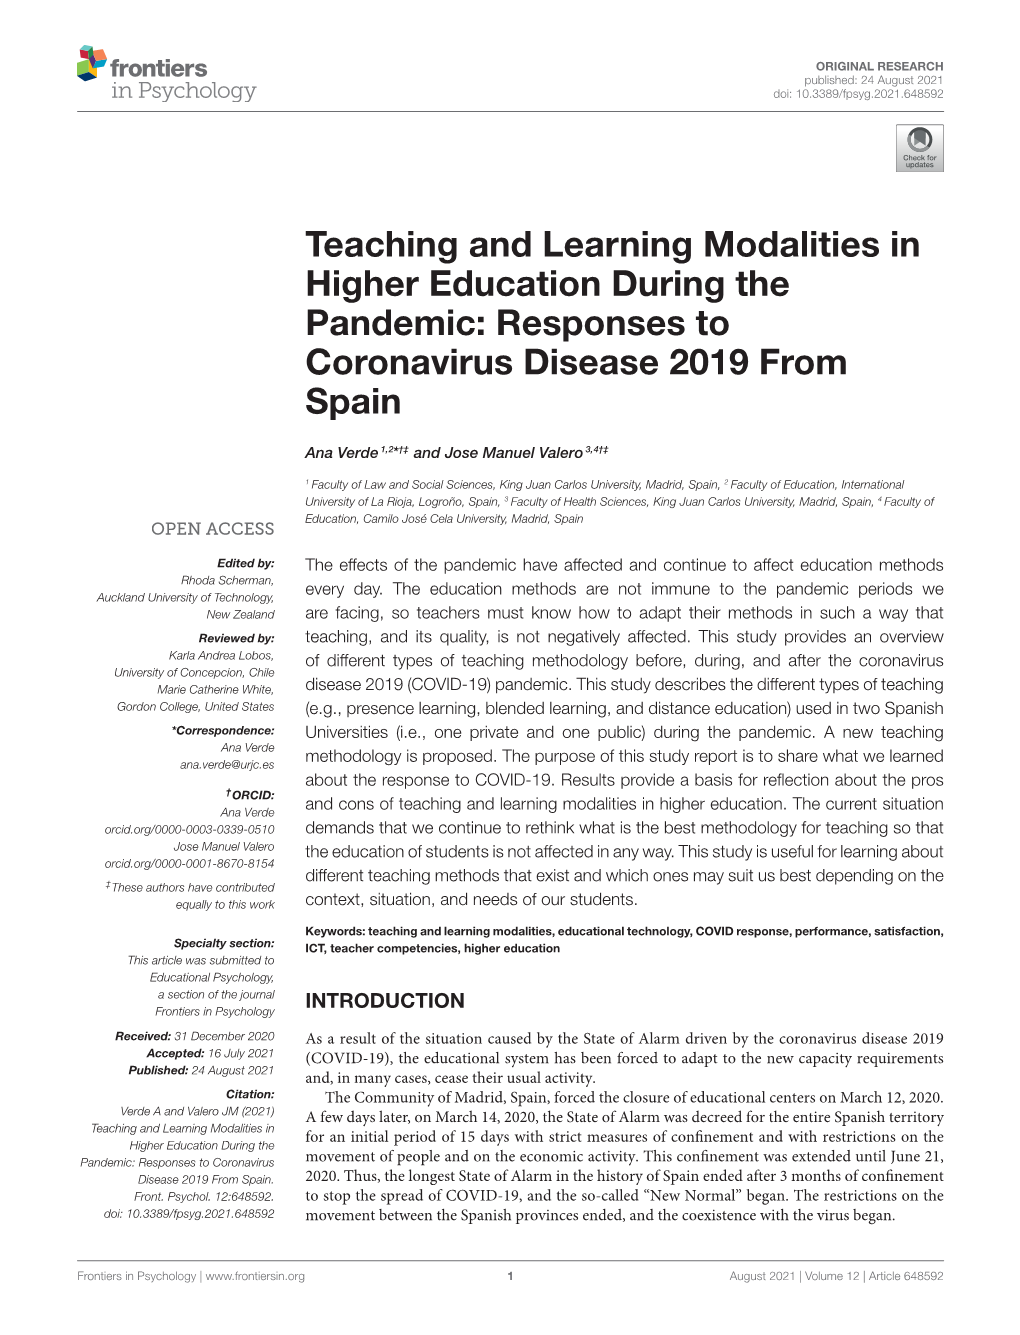 Teaching and Learning Modalities in Higher Education During the Pandemic: Responses to Coronavirus Disease 2019 from Spain